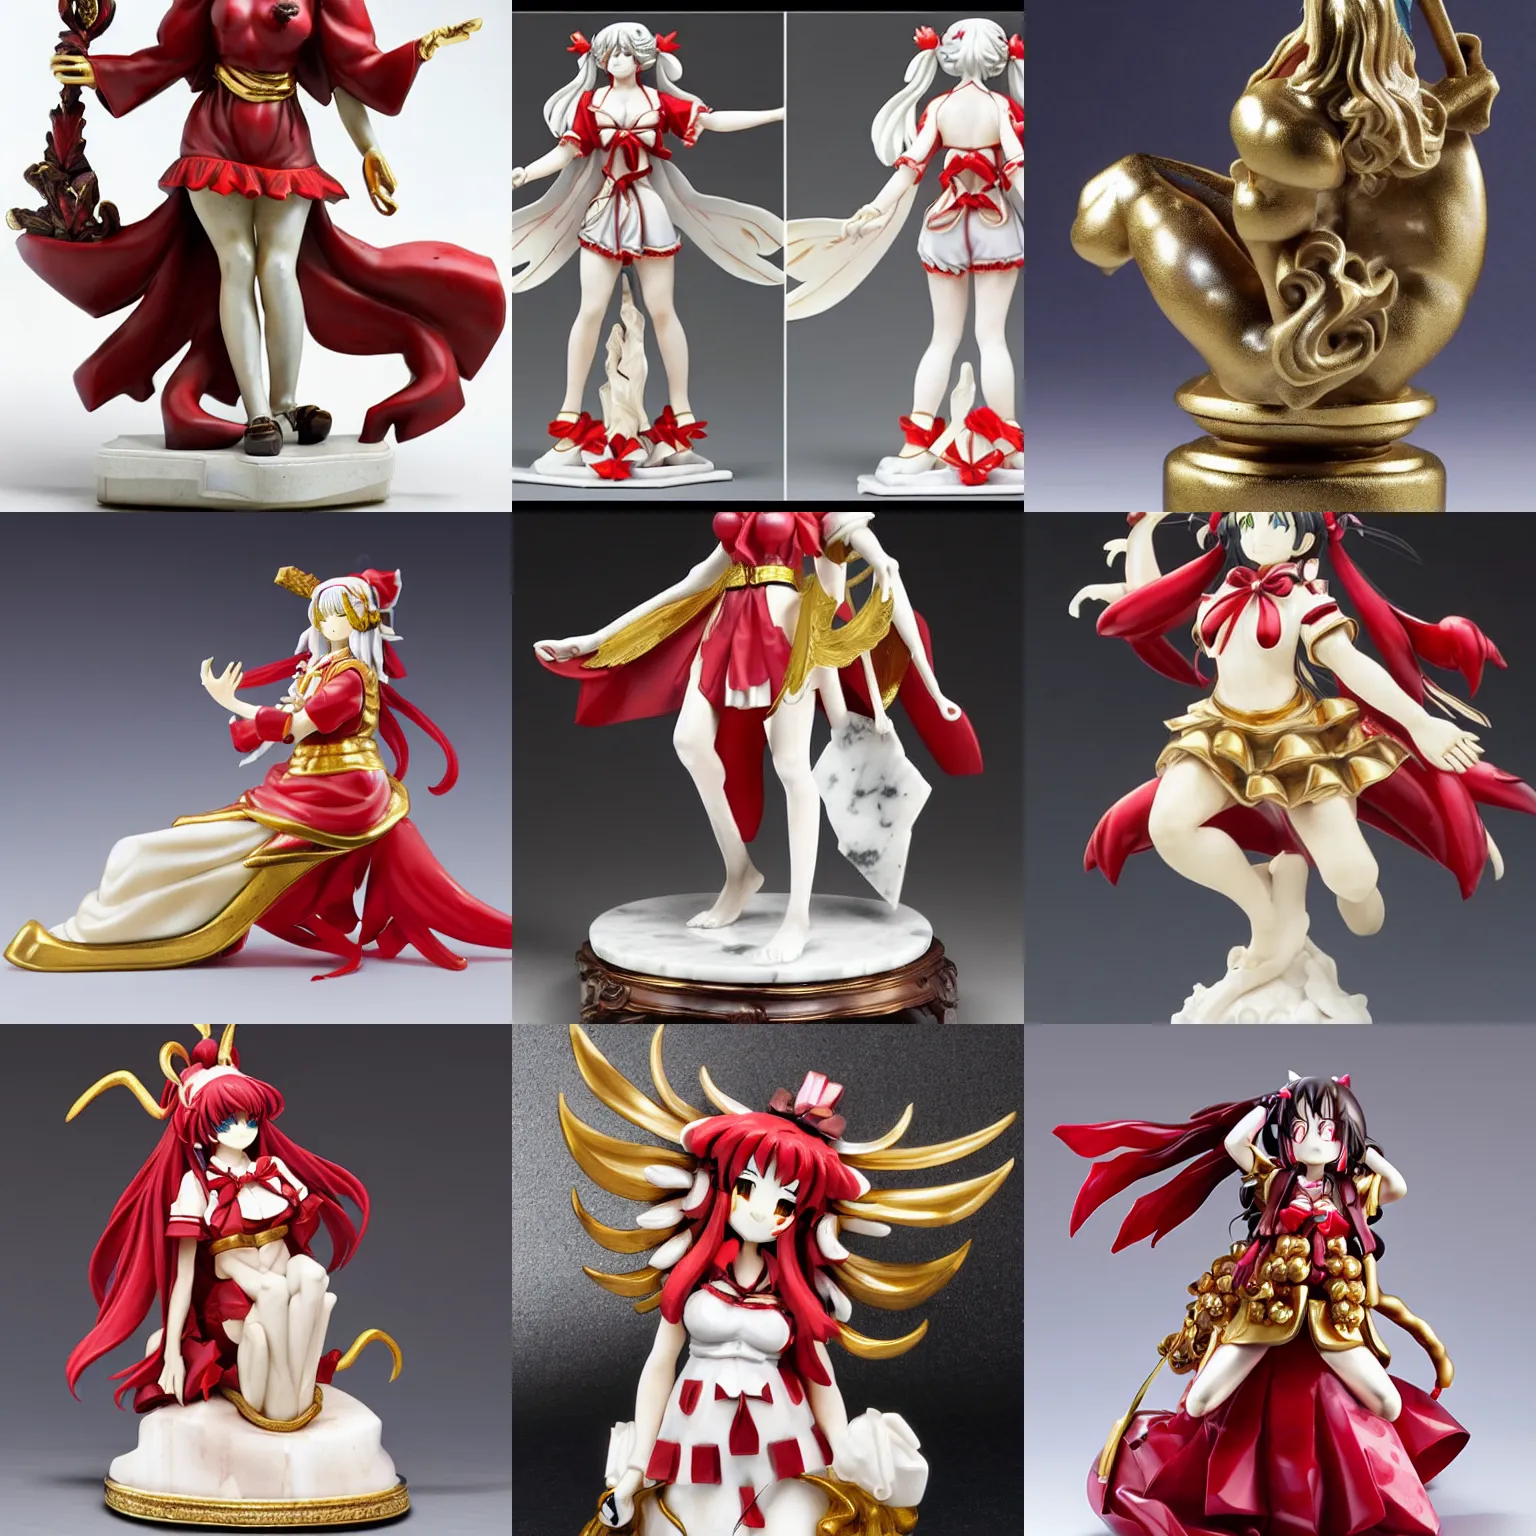 Prompt: a sculpture of reimu hakurei, marble, gold, masterpiece, anatomically correct, extreme details